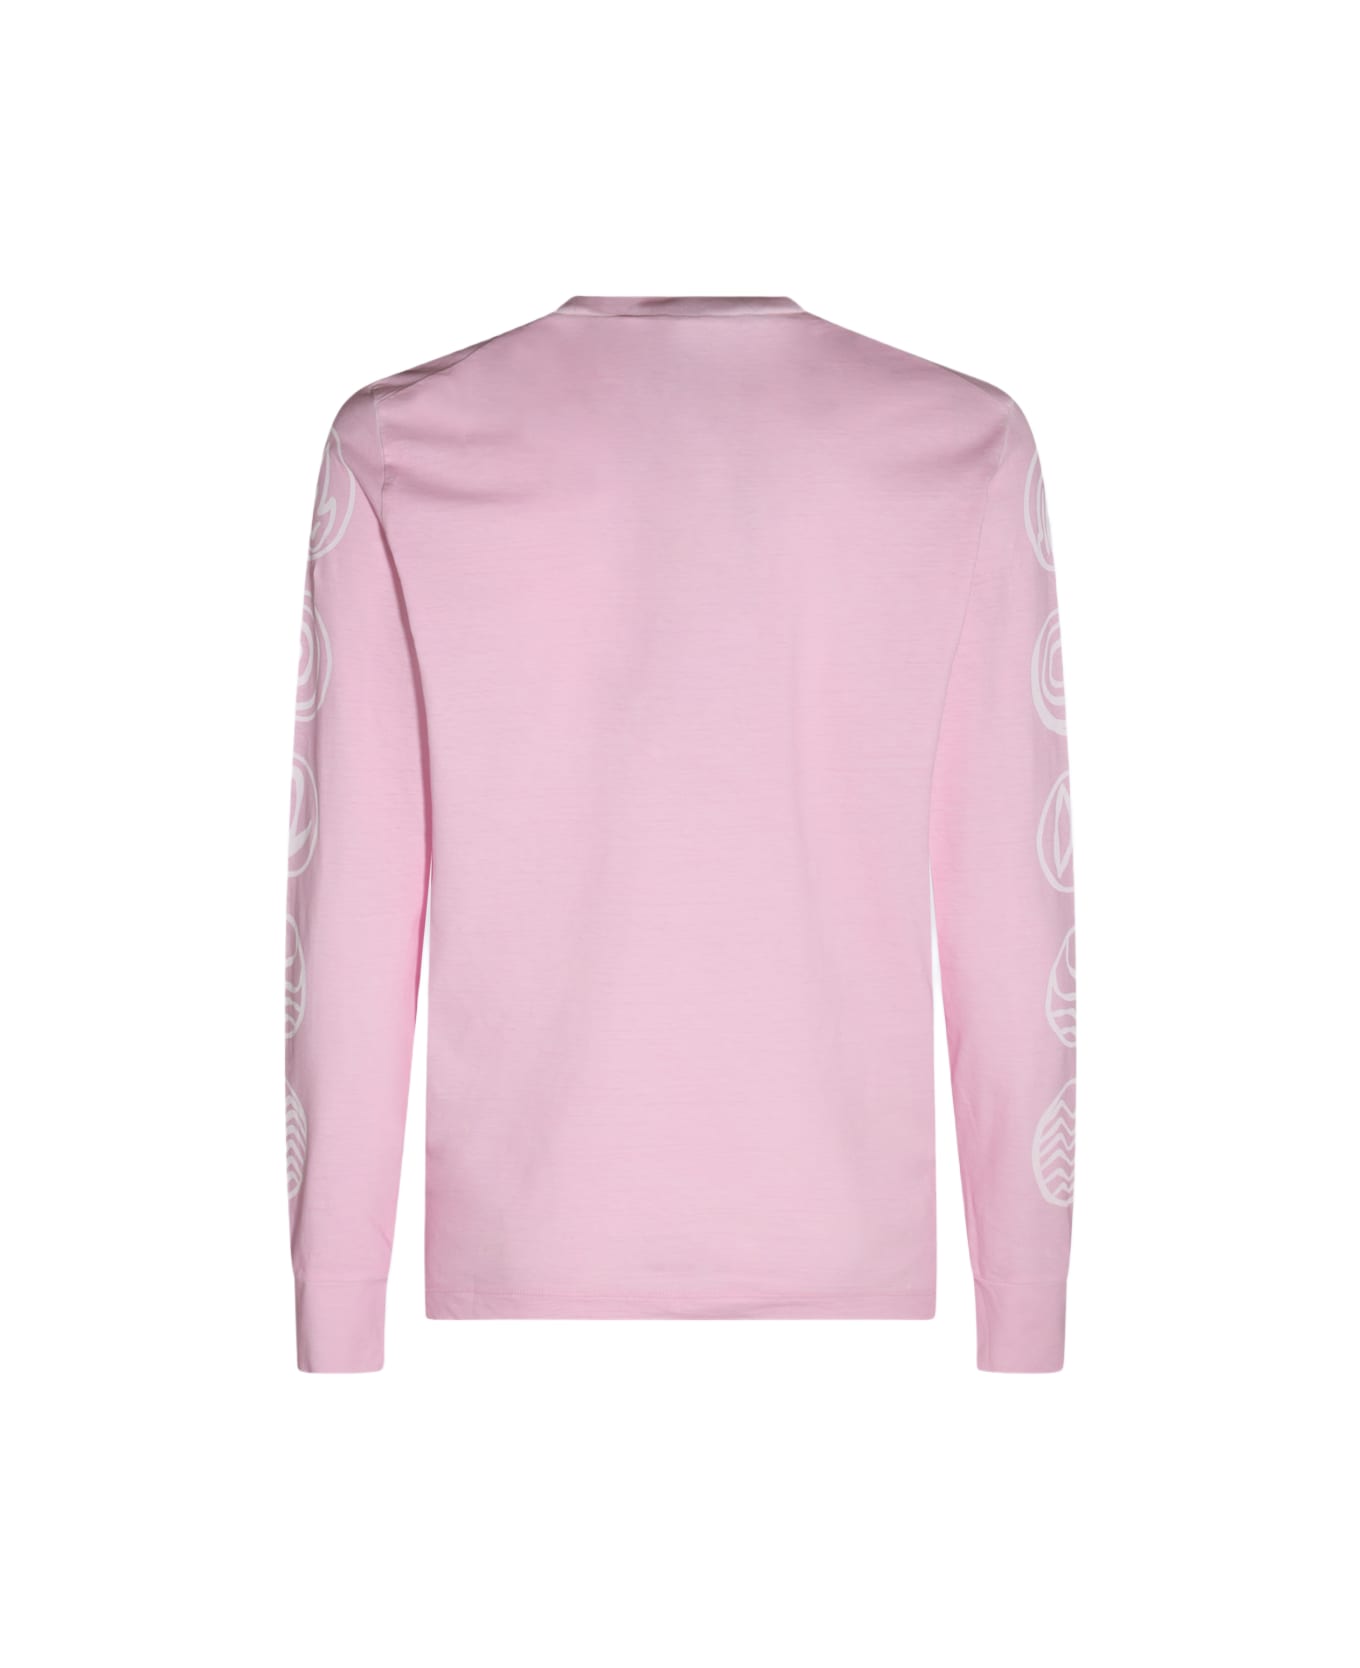 Dsquared2 Pink Cotton T-shirt - Pink シャツ